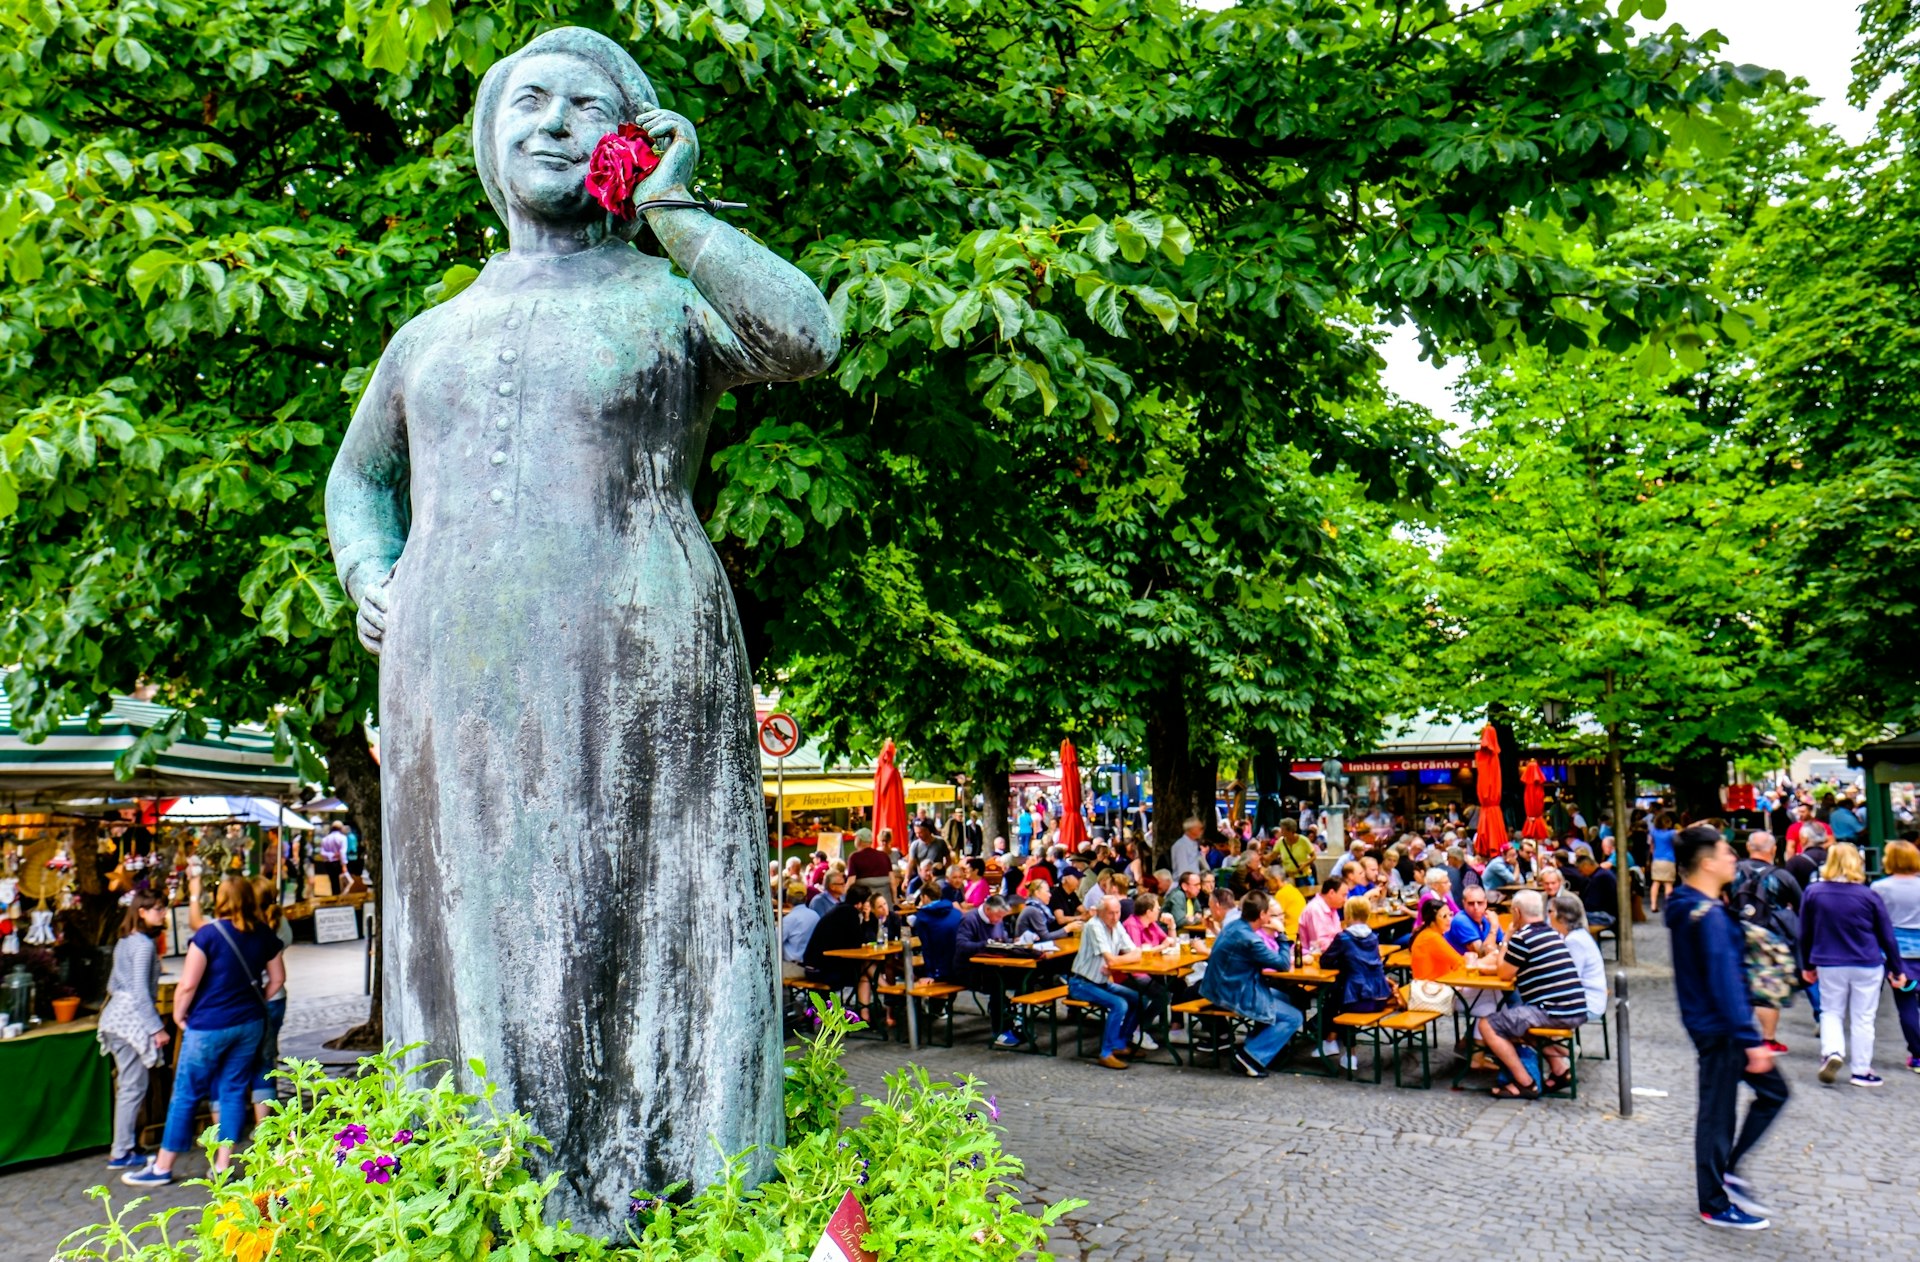 A statue stands among foliage. Behind tables are full of people dining from nearby market stalls